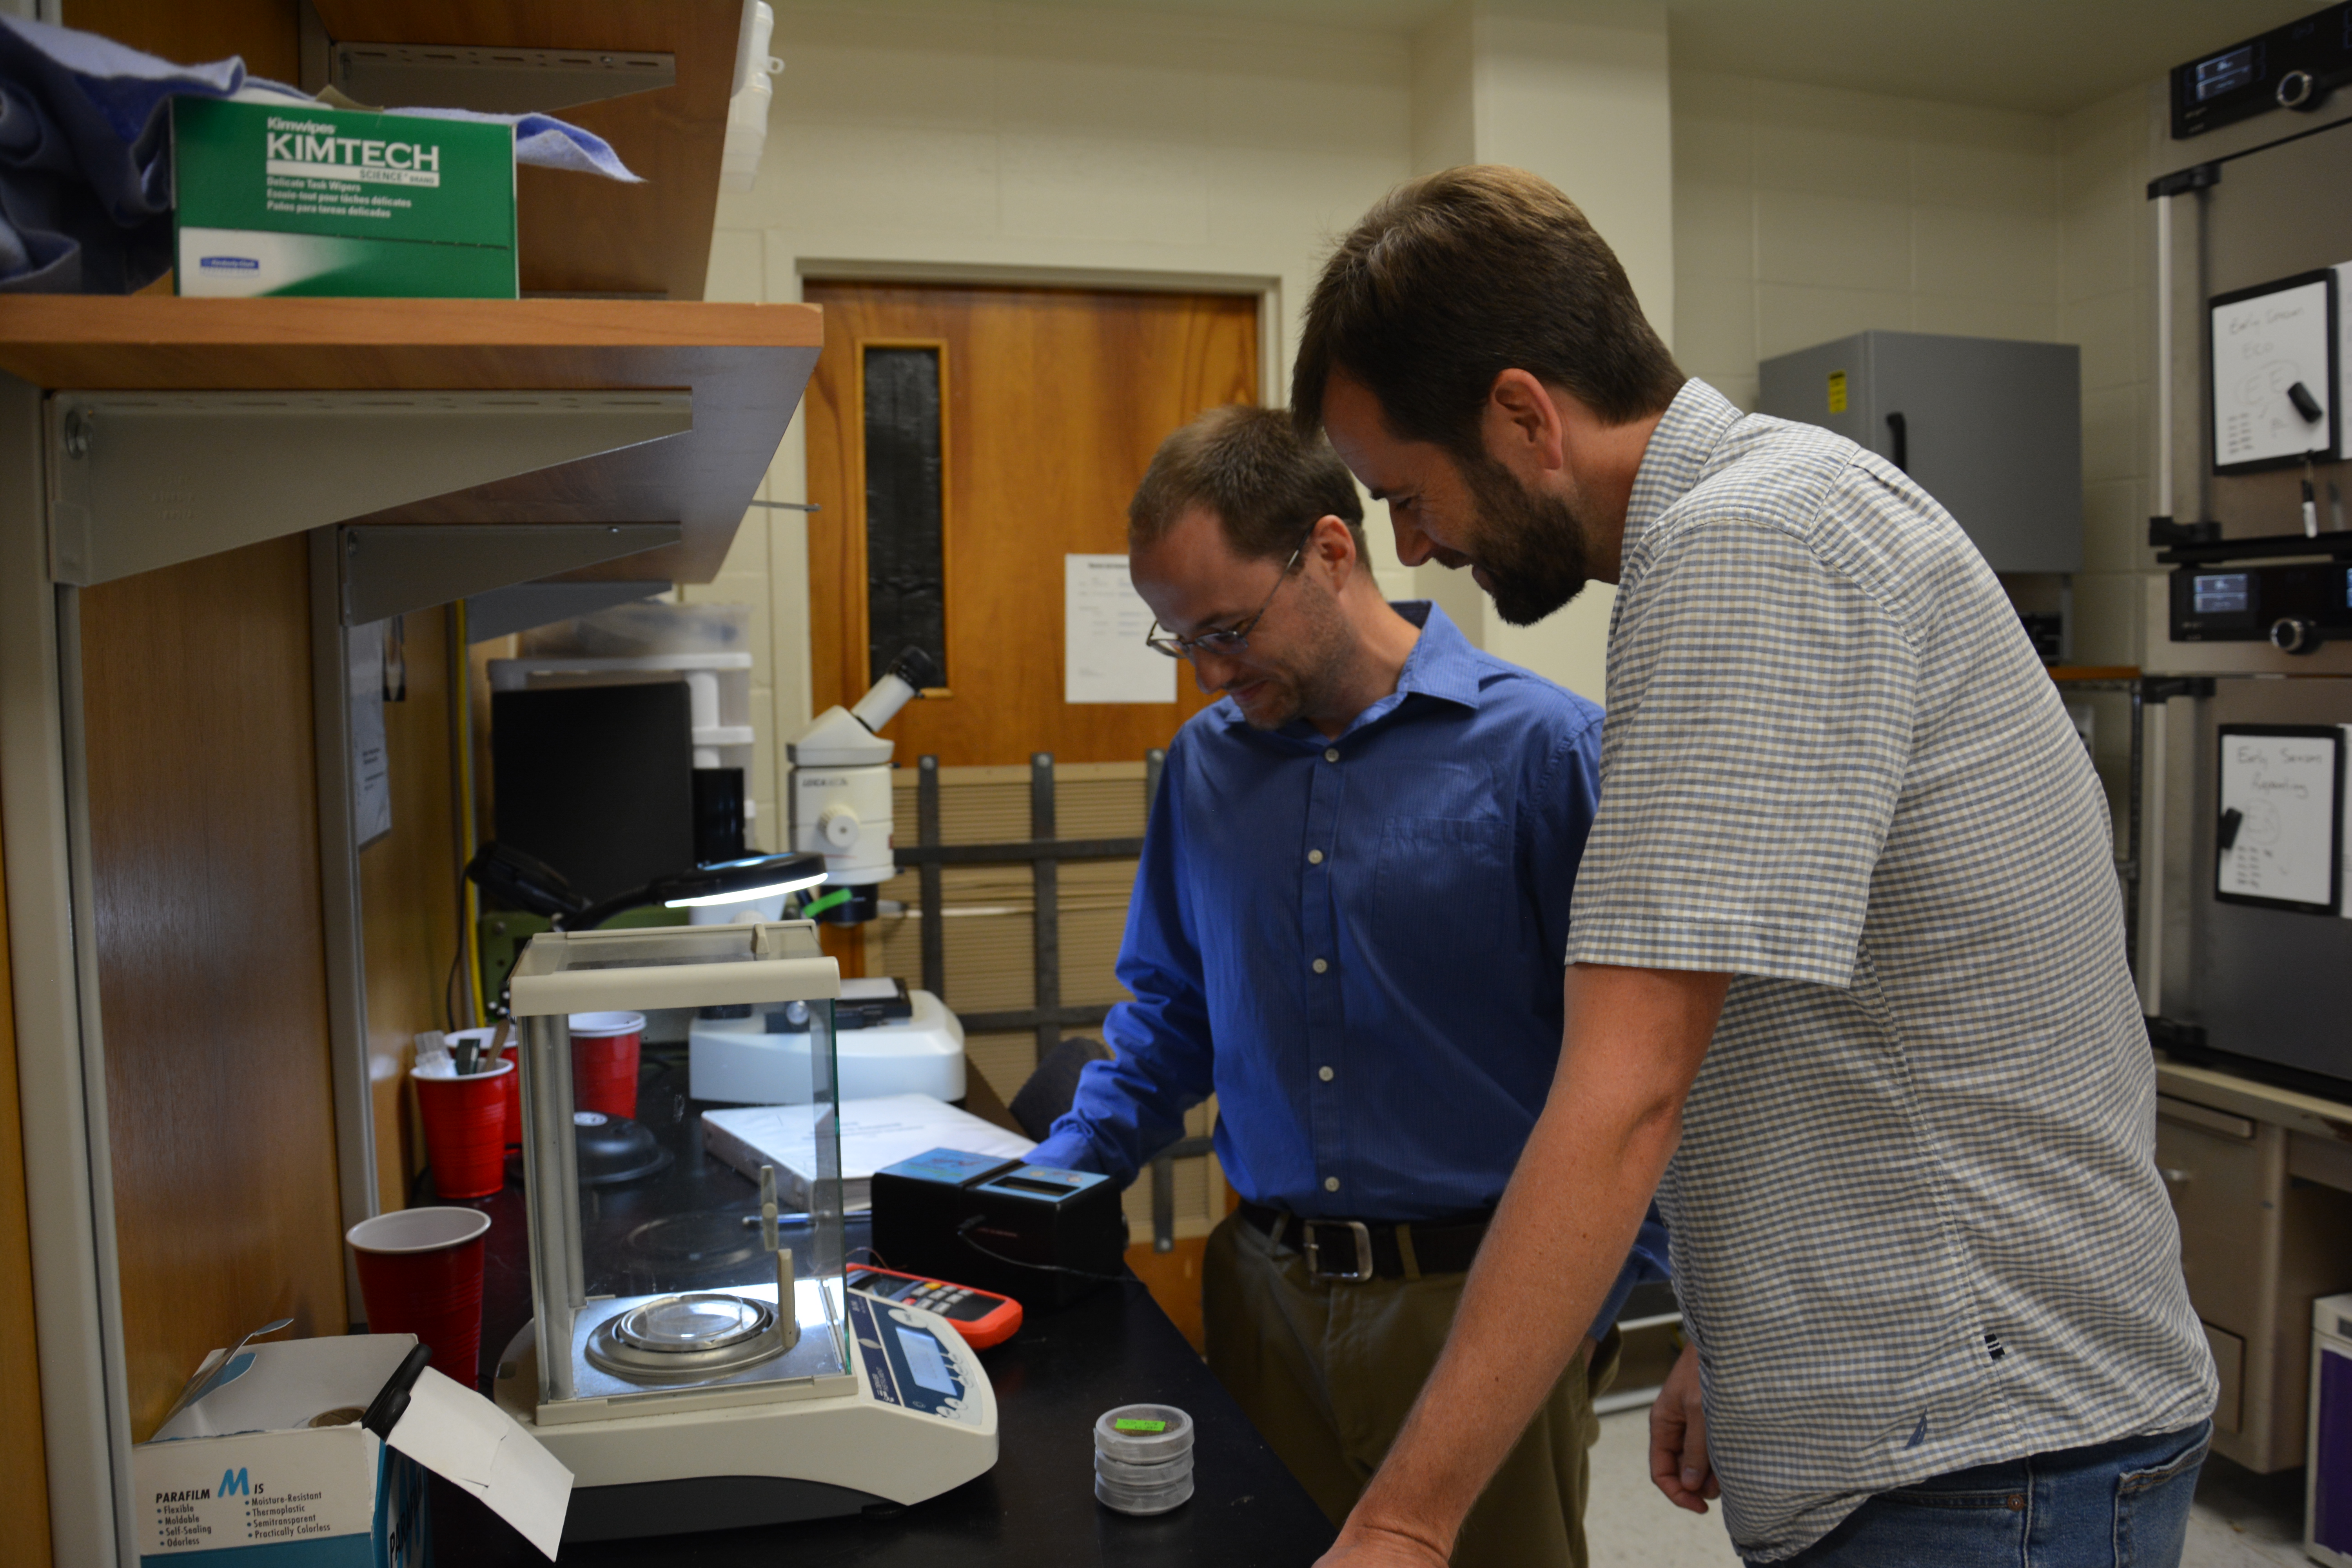 Dr. Warner with Josh Hall, a Ph.D. student, conducting research in his lab.